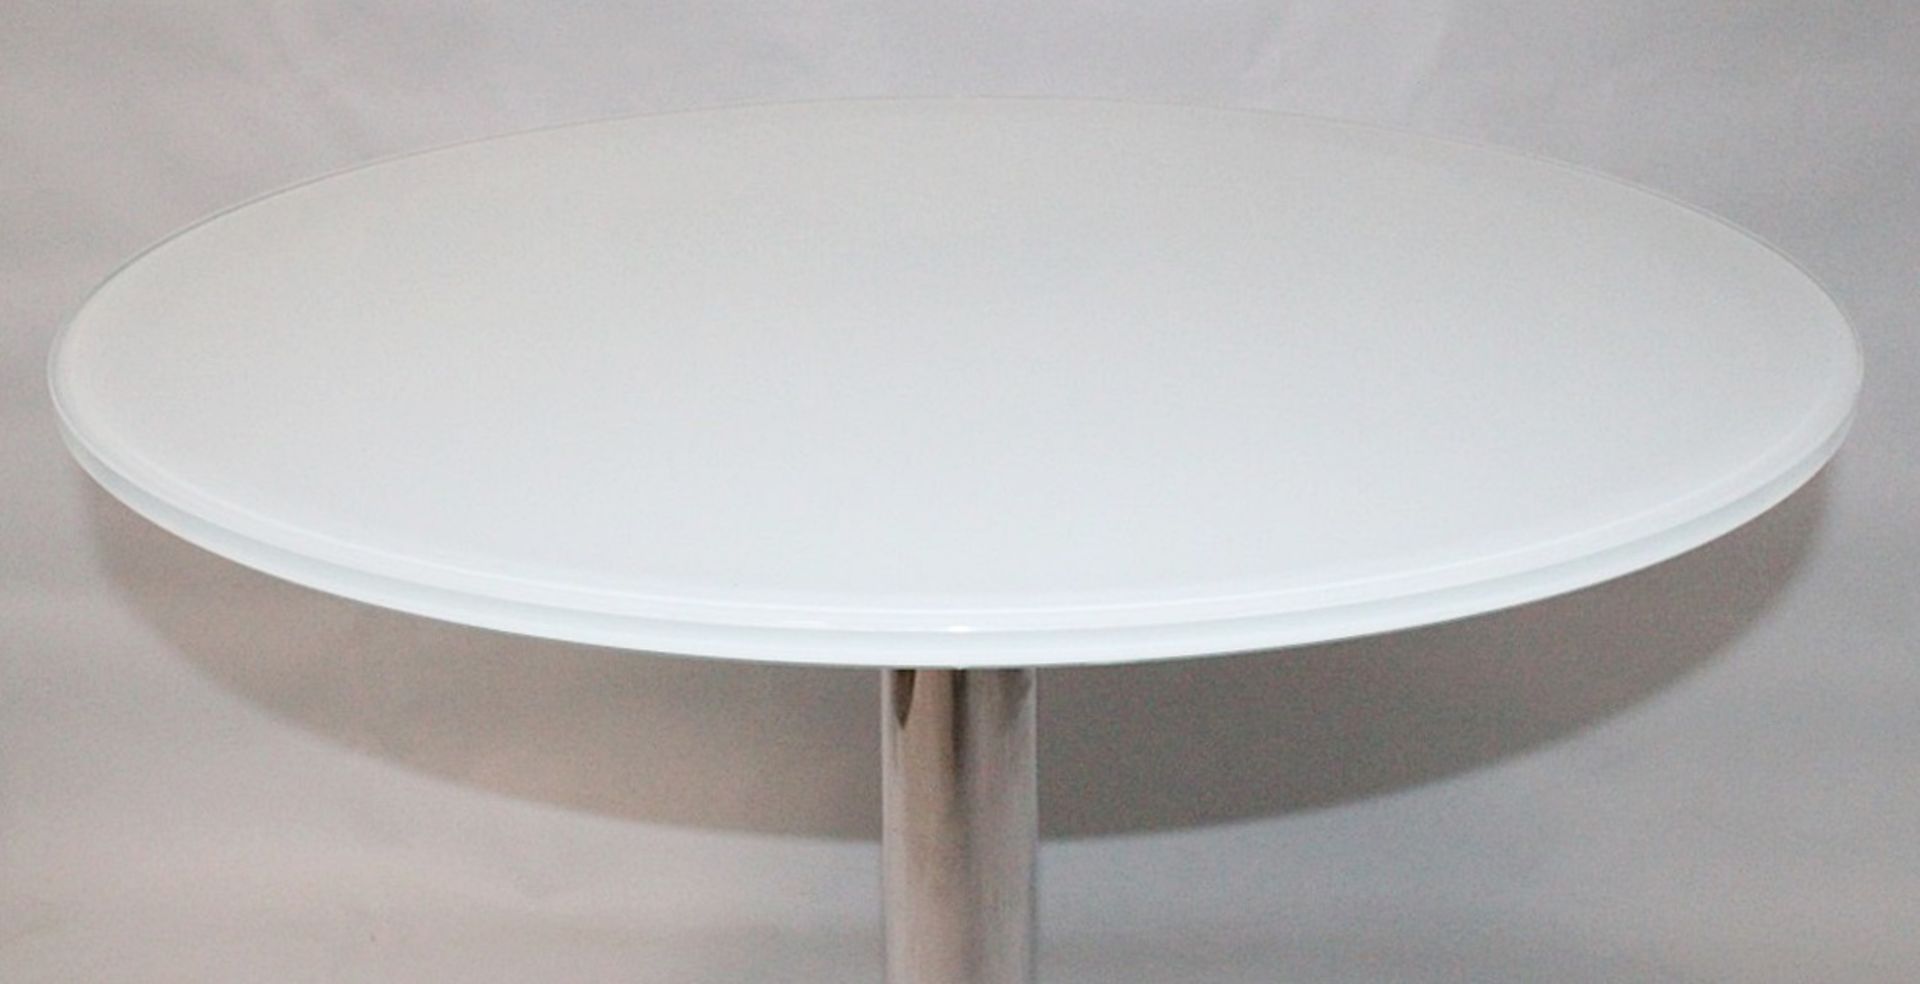 1 x ROSET Bobine Table Top White Lacquered Glass - *Please Read Condition Report* Diameter: 80cm - - Image 6 of 6